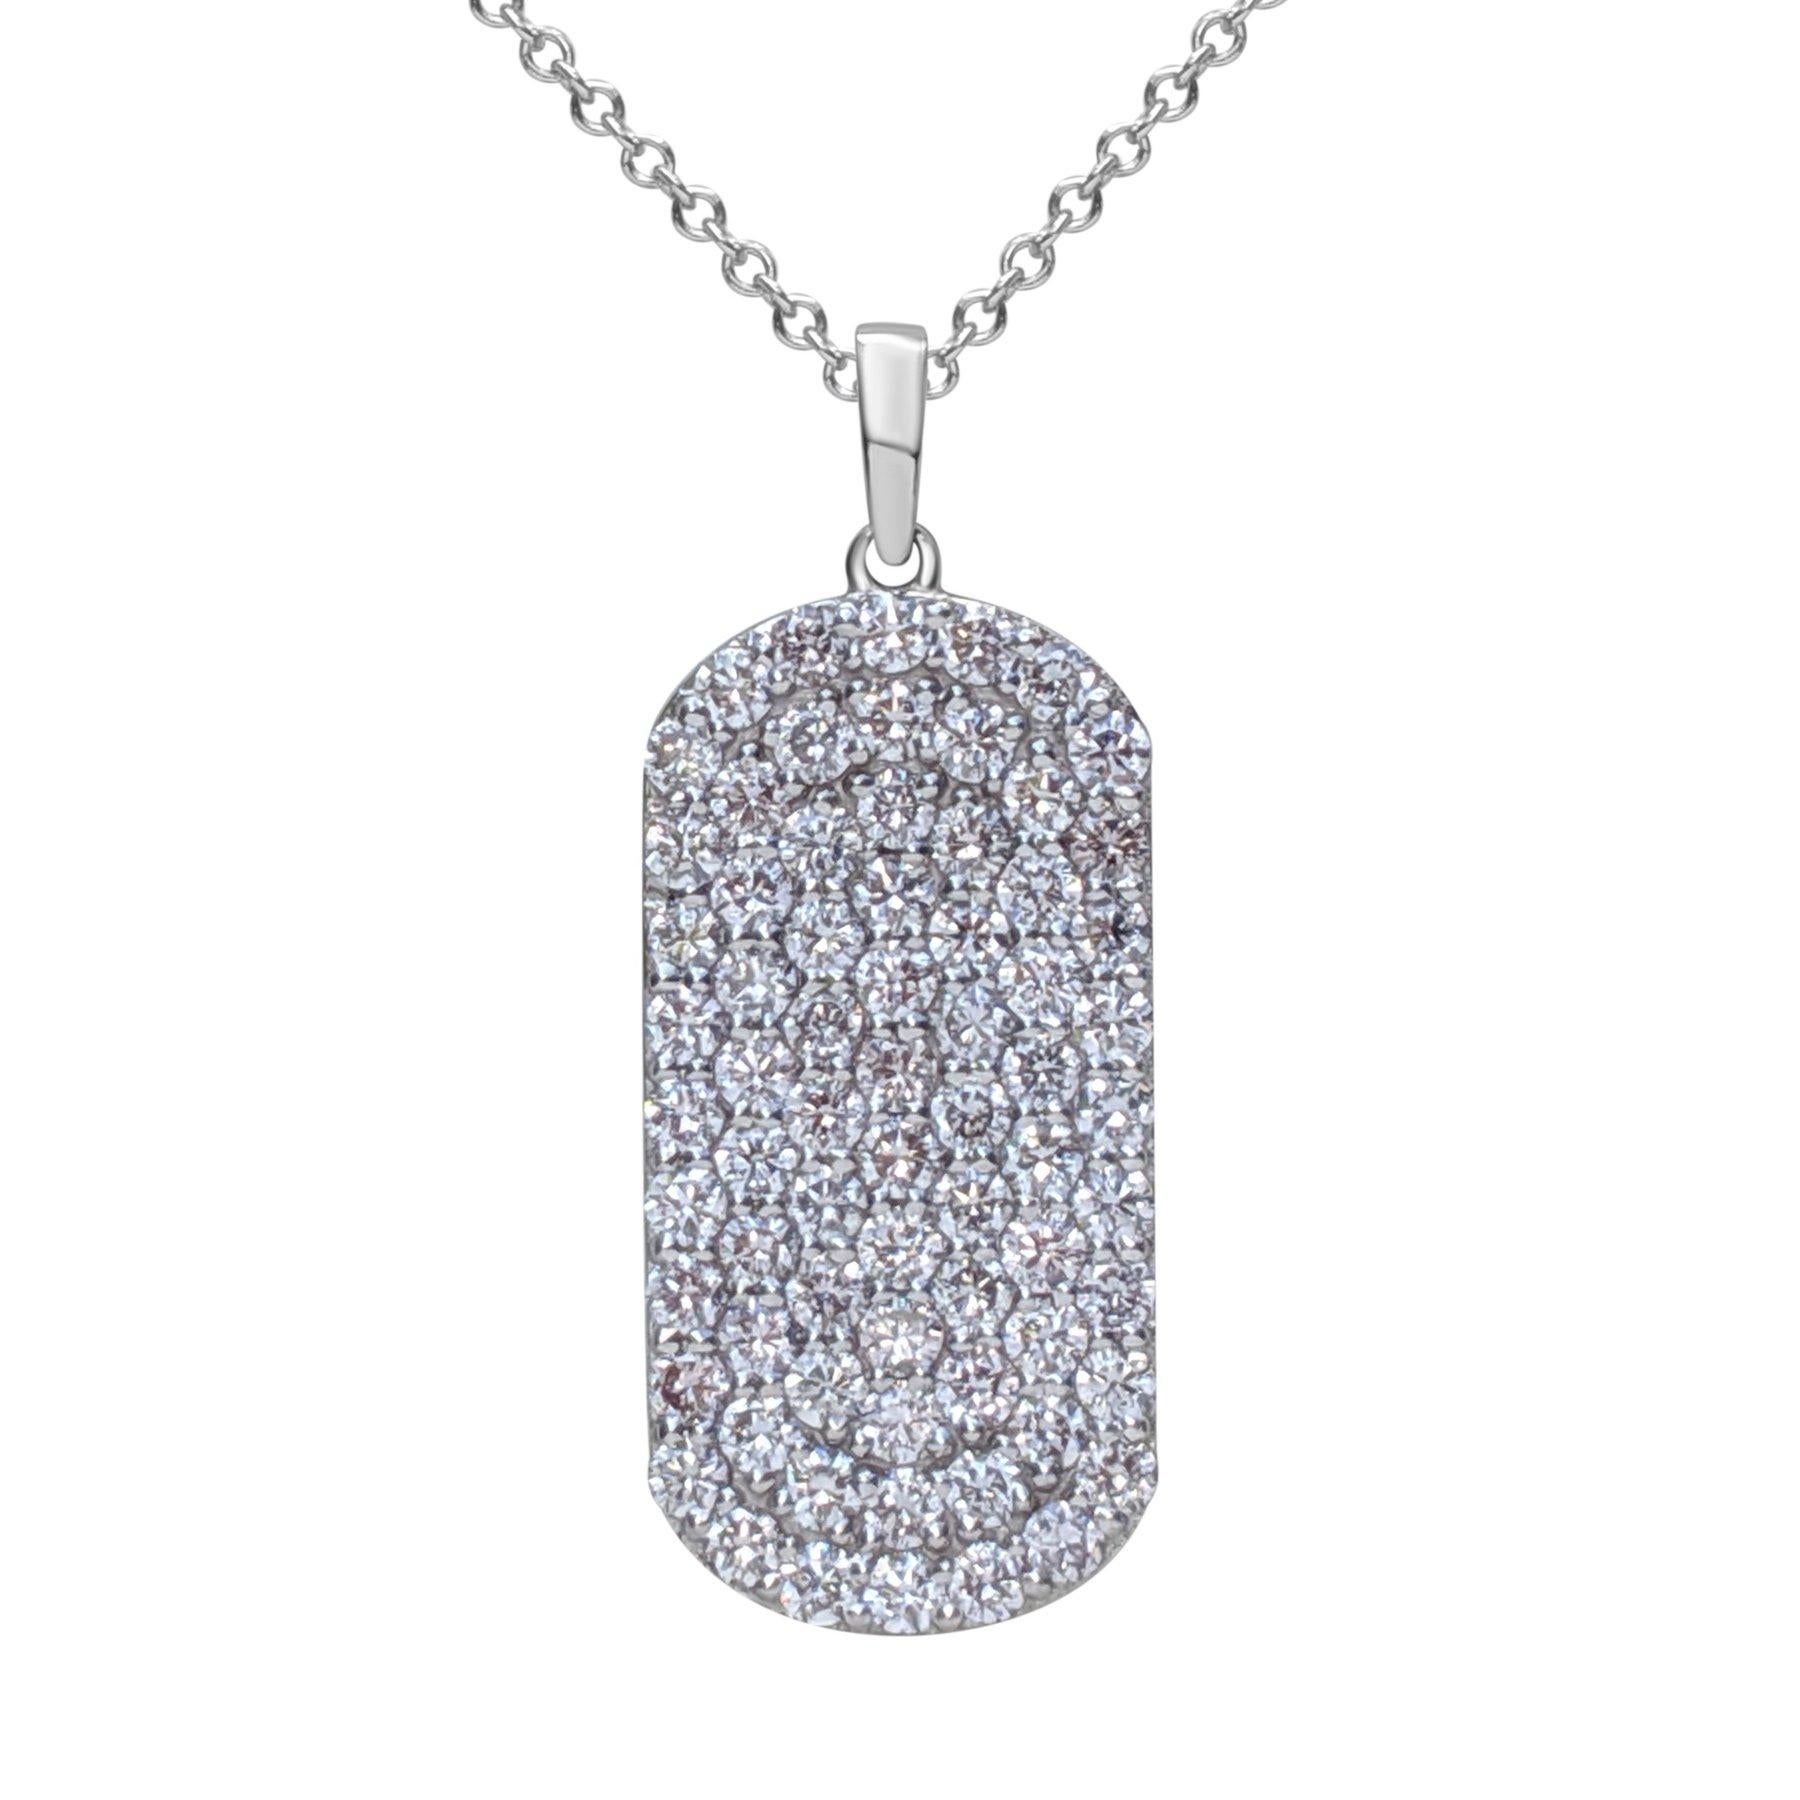 Round Cut NO RESERVE! 1.10 Ct Fancy Pink Diamond 14 kt. White Gold Pendant Necklace For Sale